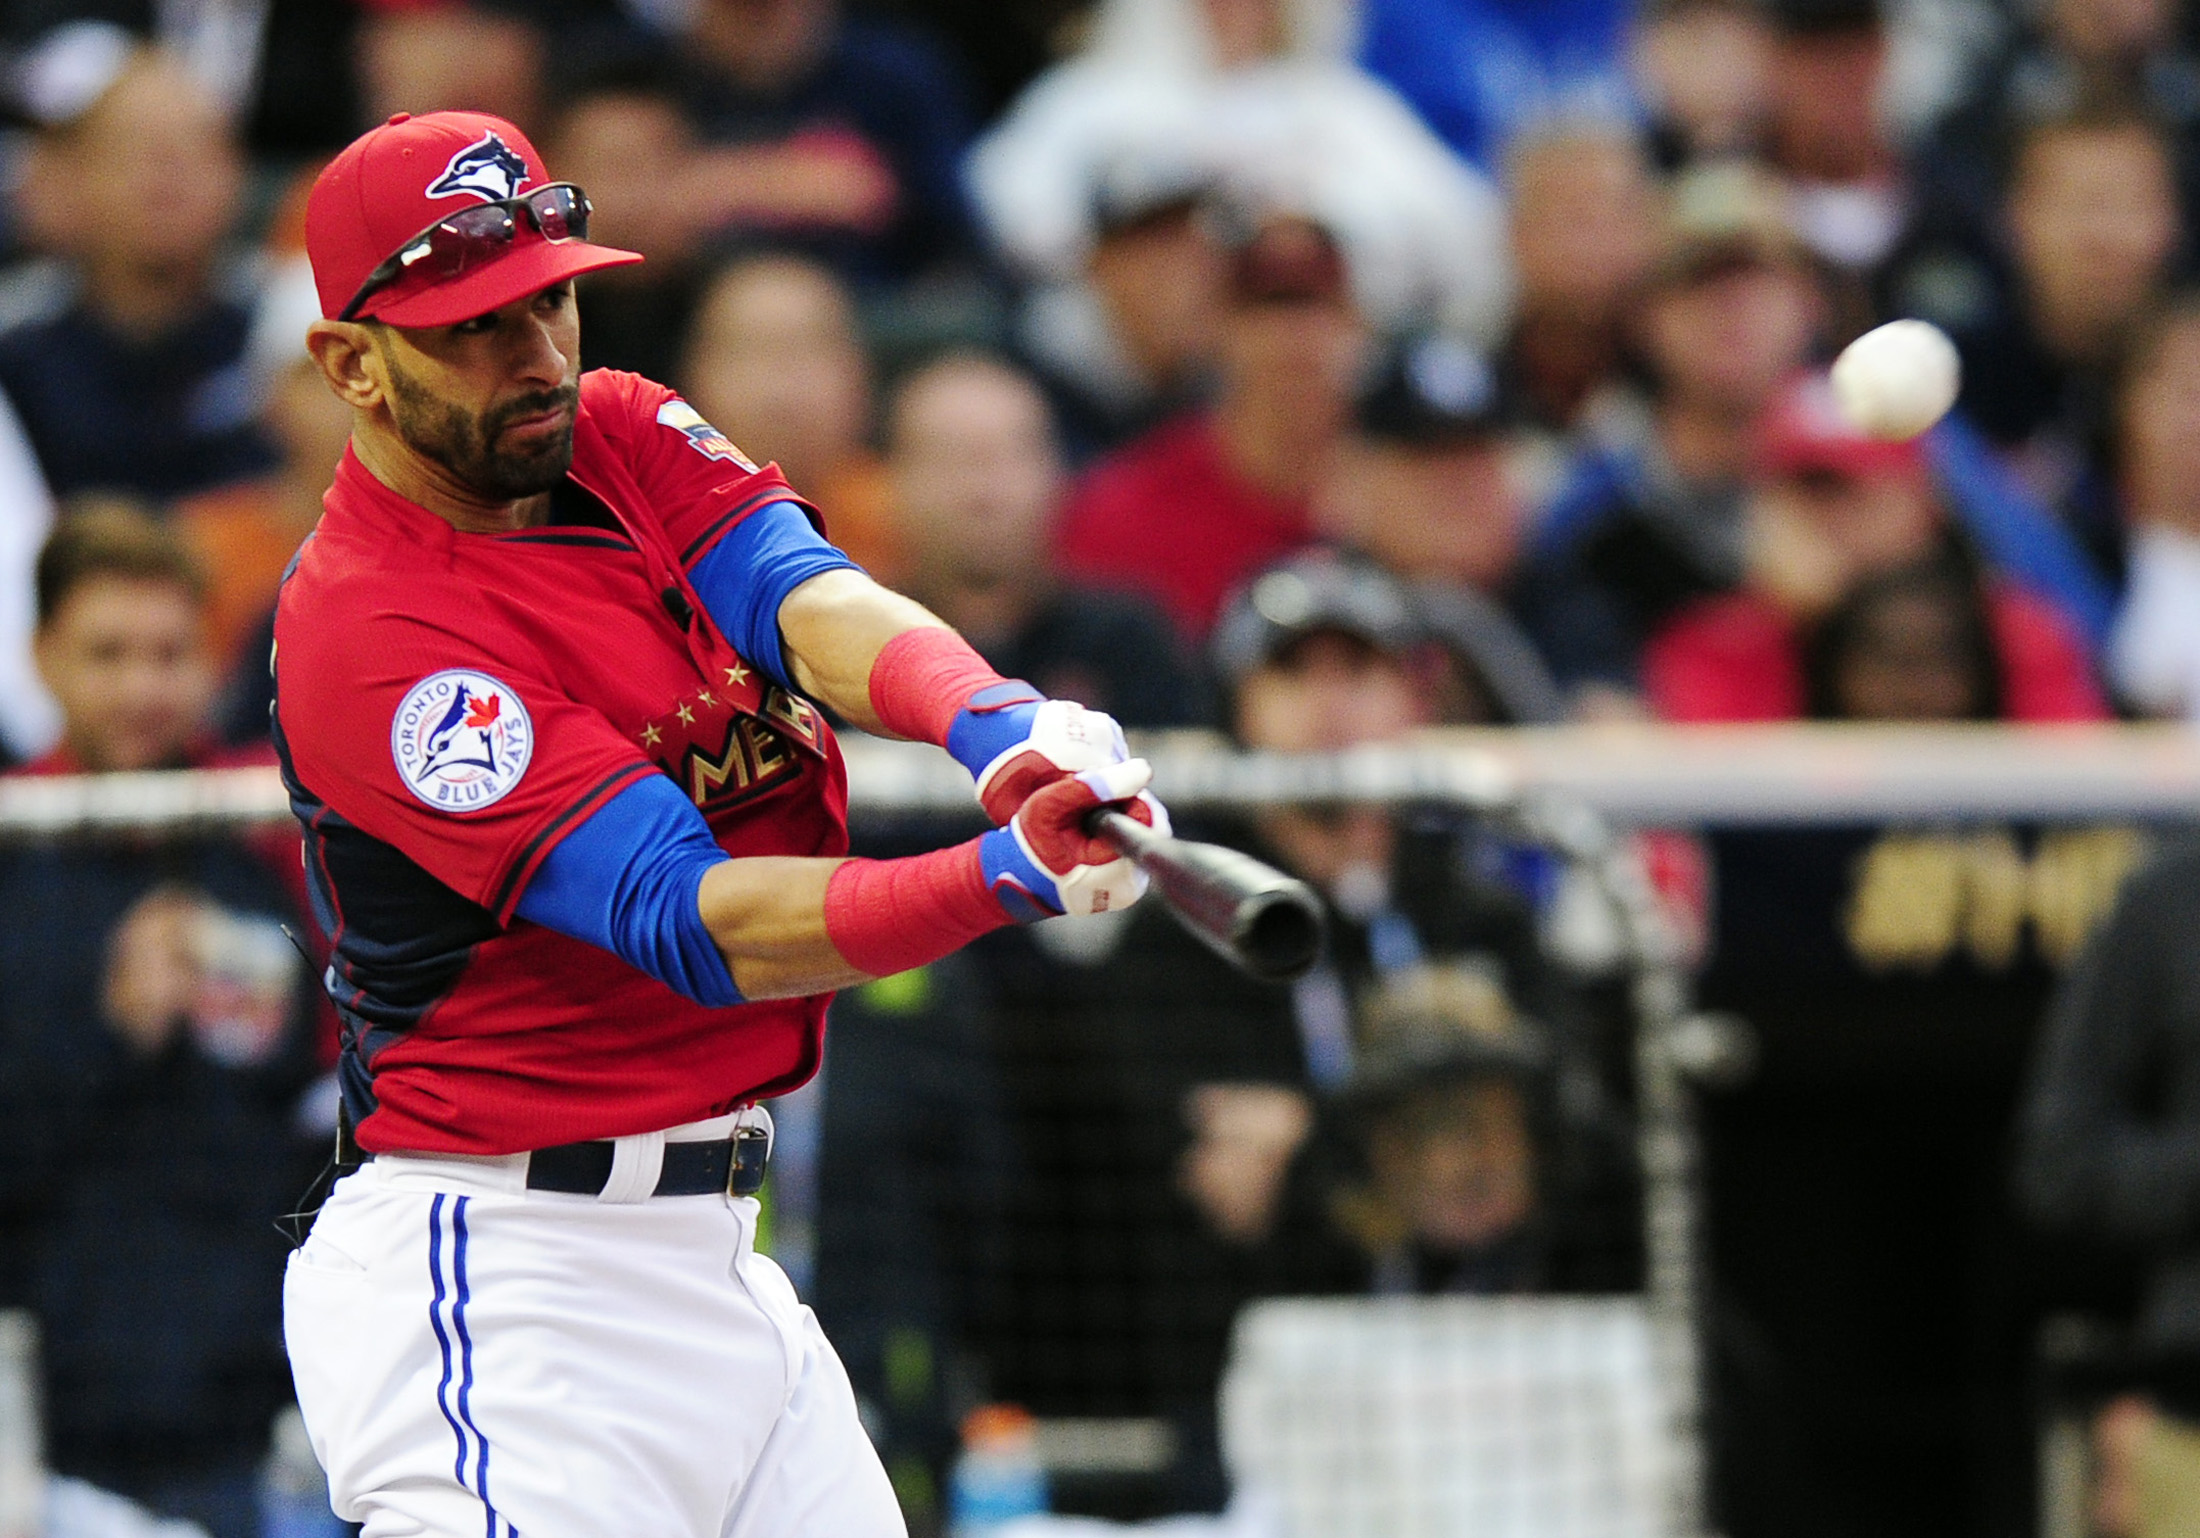 Jose Bautista put on an impressive power display in the first round, belting 10 home runs.